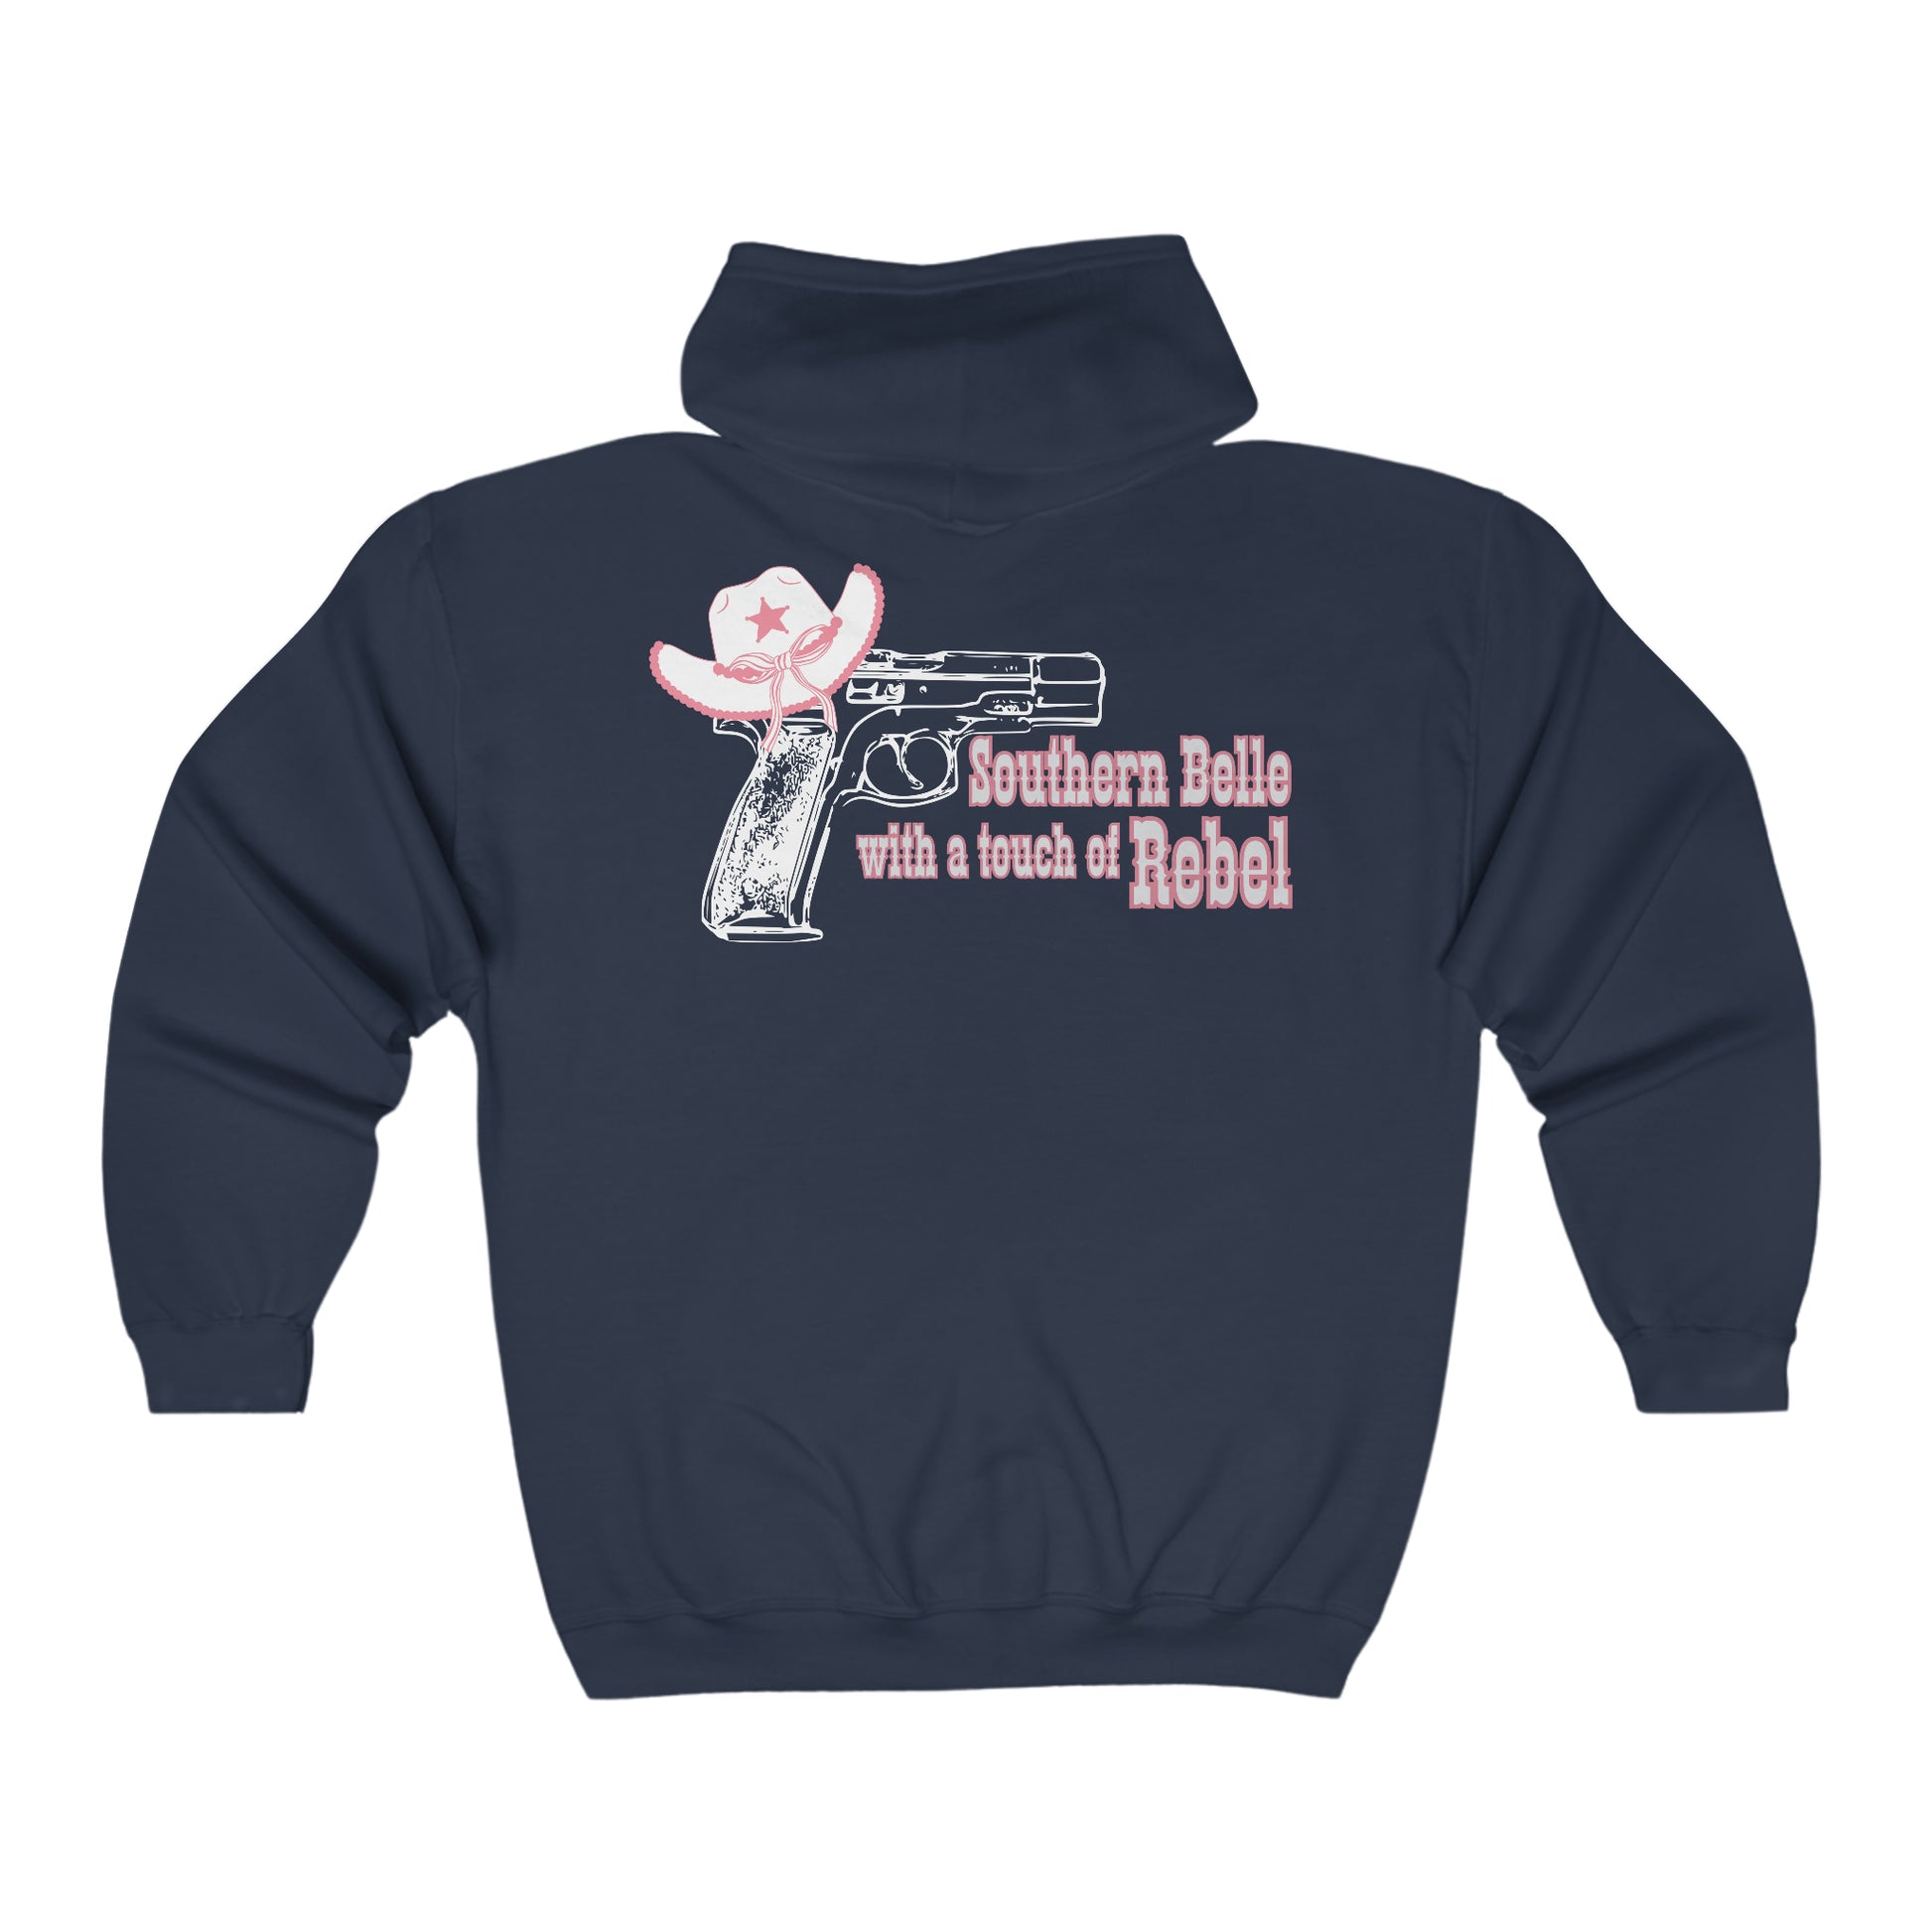 Southern Belle With A Touch Of Rebel Zip-Up Sweatshirt Navy Back